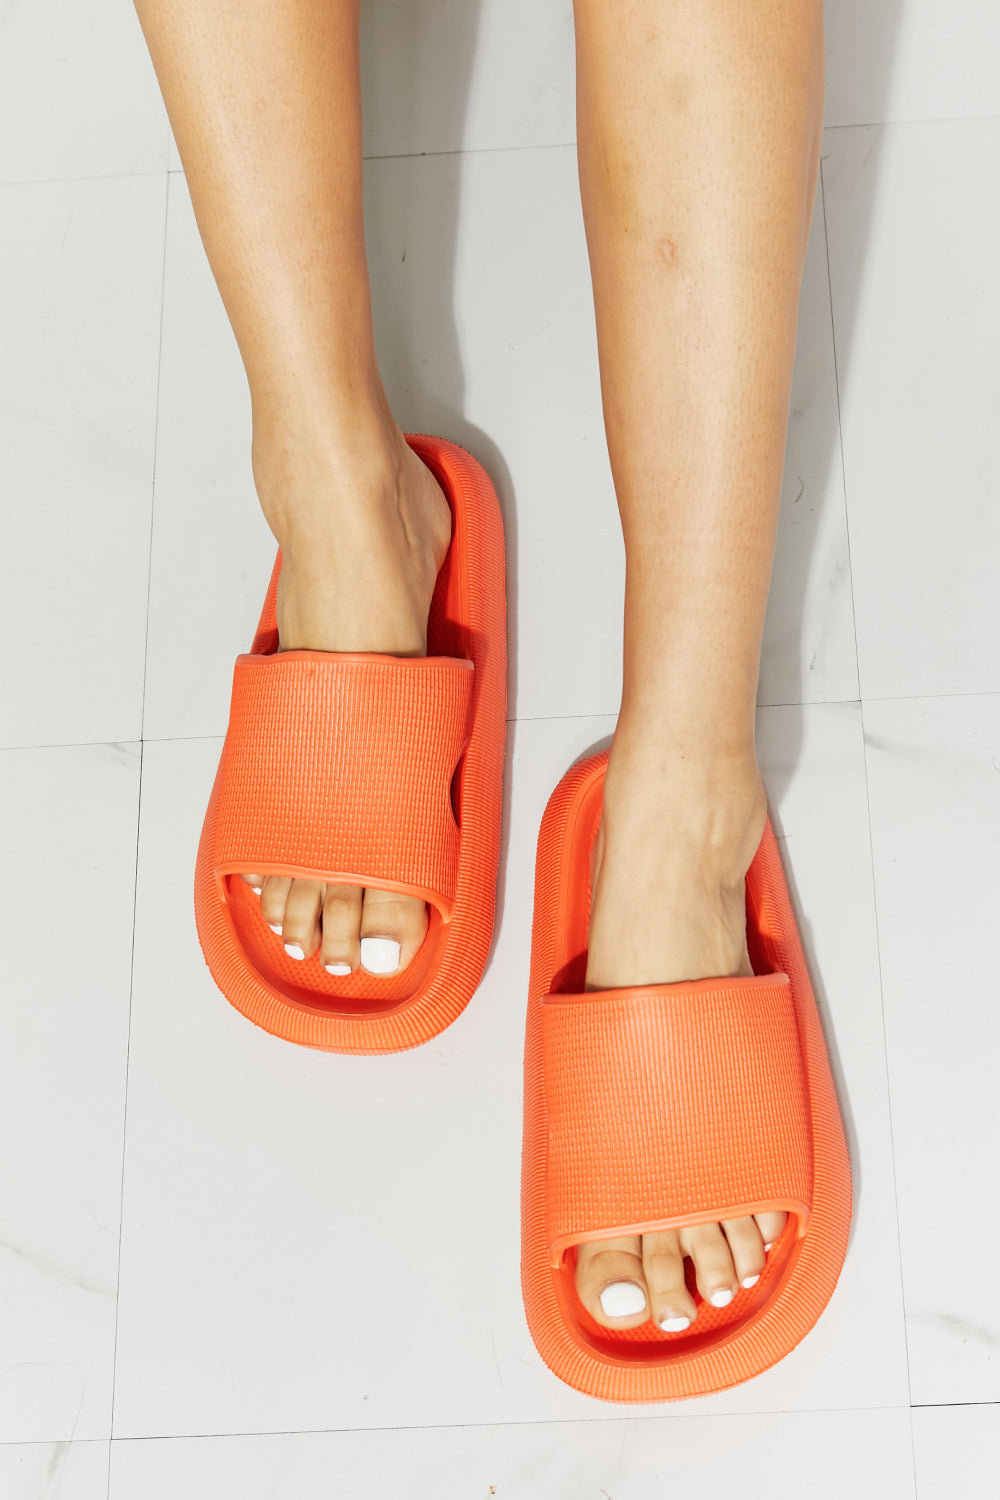 MMShoes Arms Around Me Open Toe Slide in Orange - Tigbul's Fashion